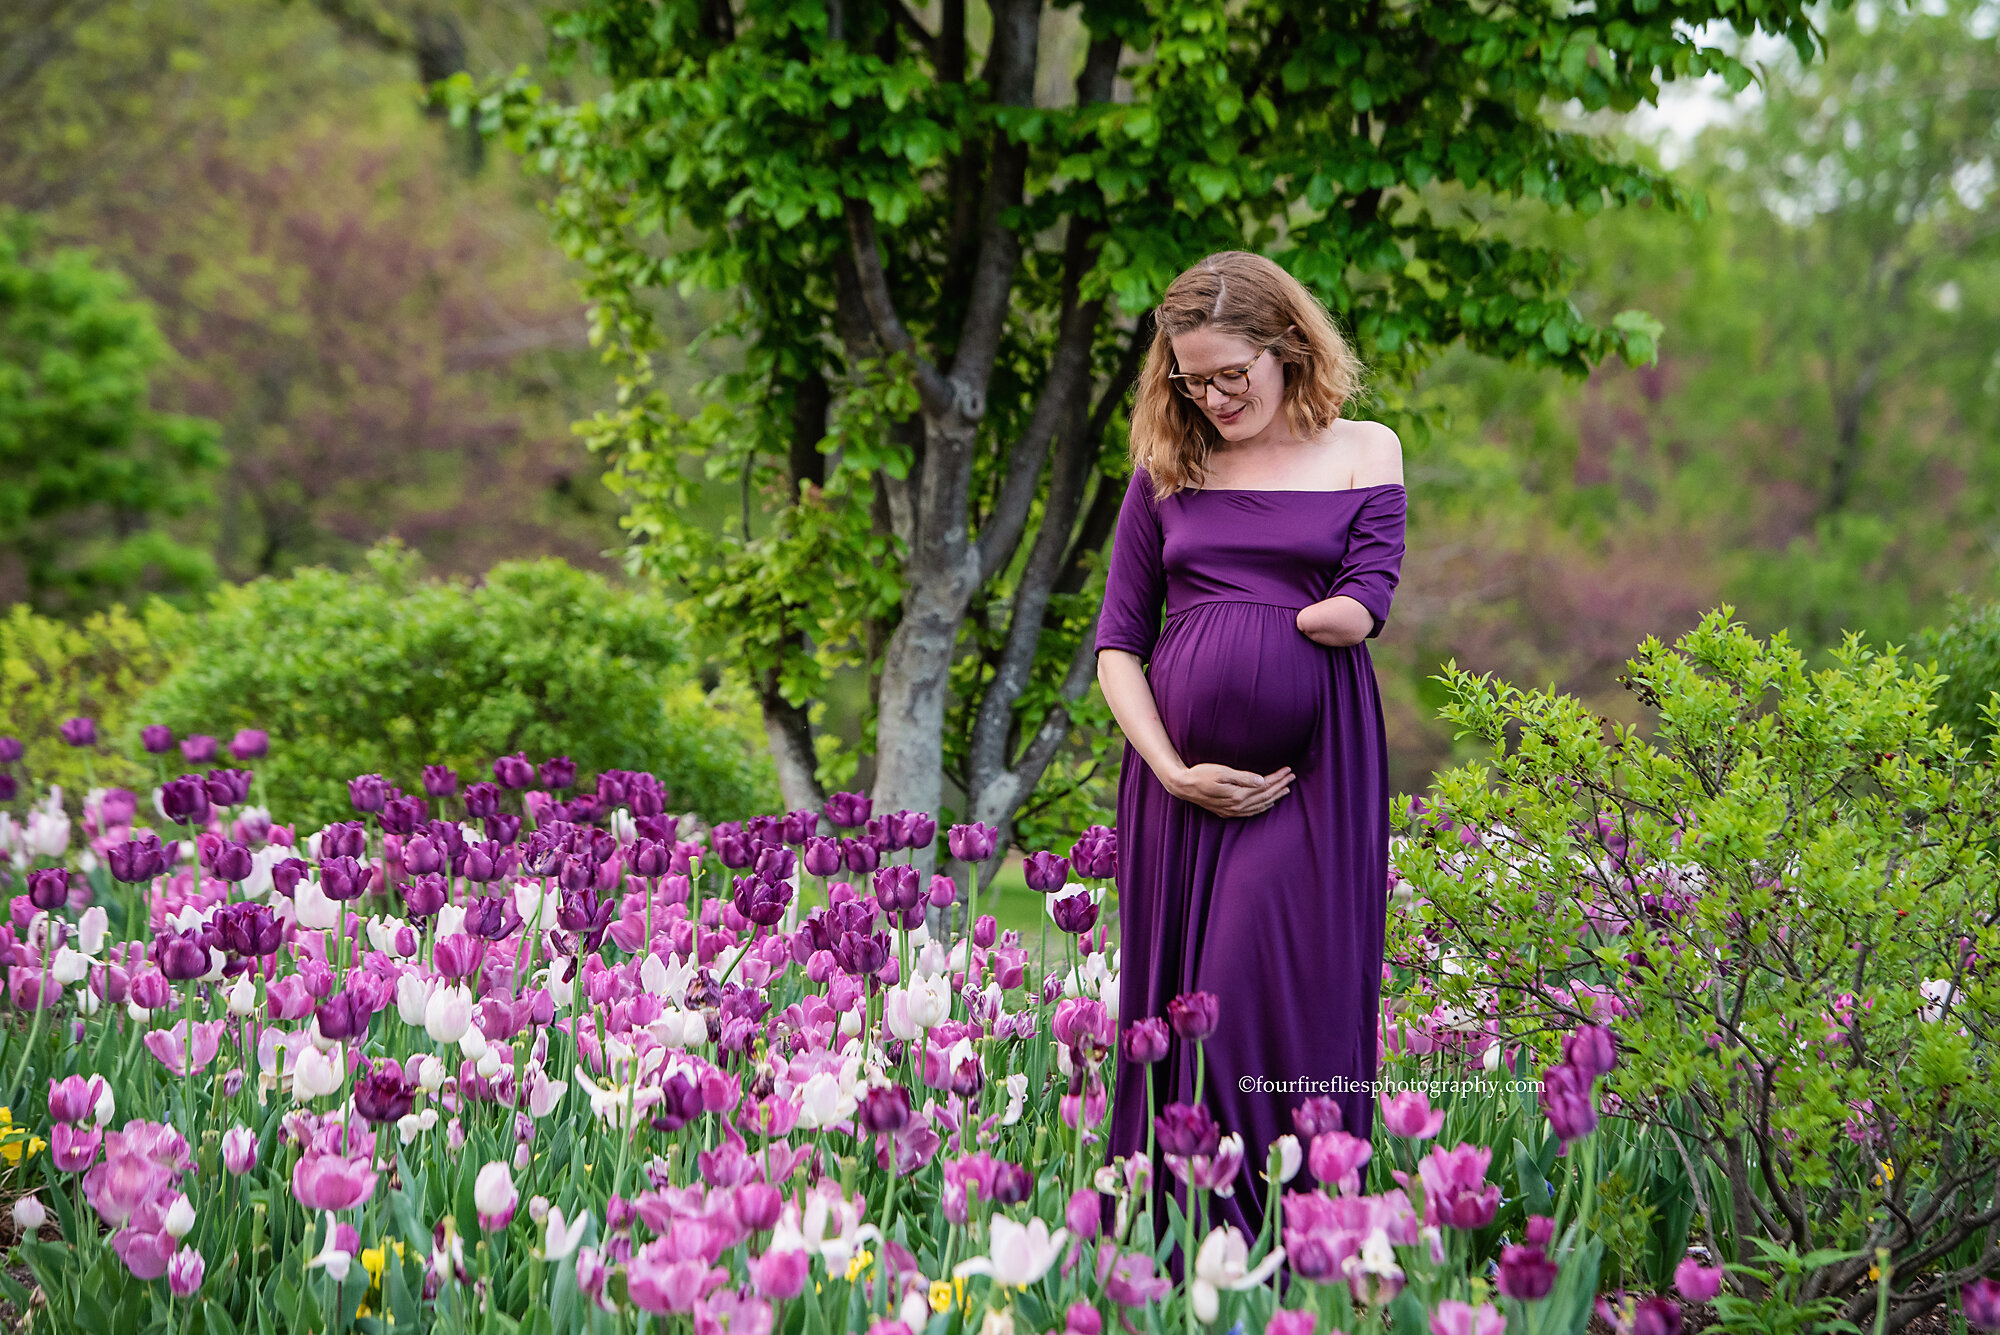 st-louis-maternity-photographer-expecting-mom-in-purple-gown-standing-in-purple-tulips-at-forest-park.jpg